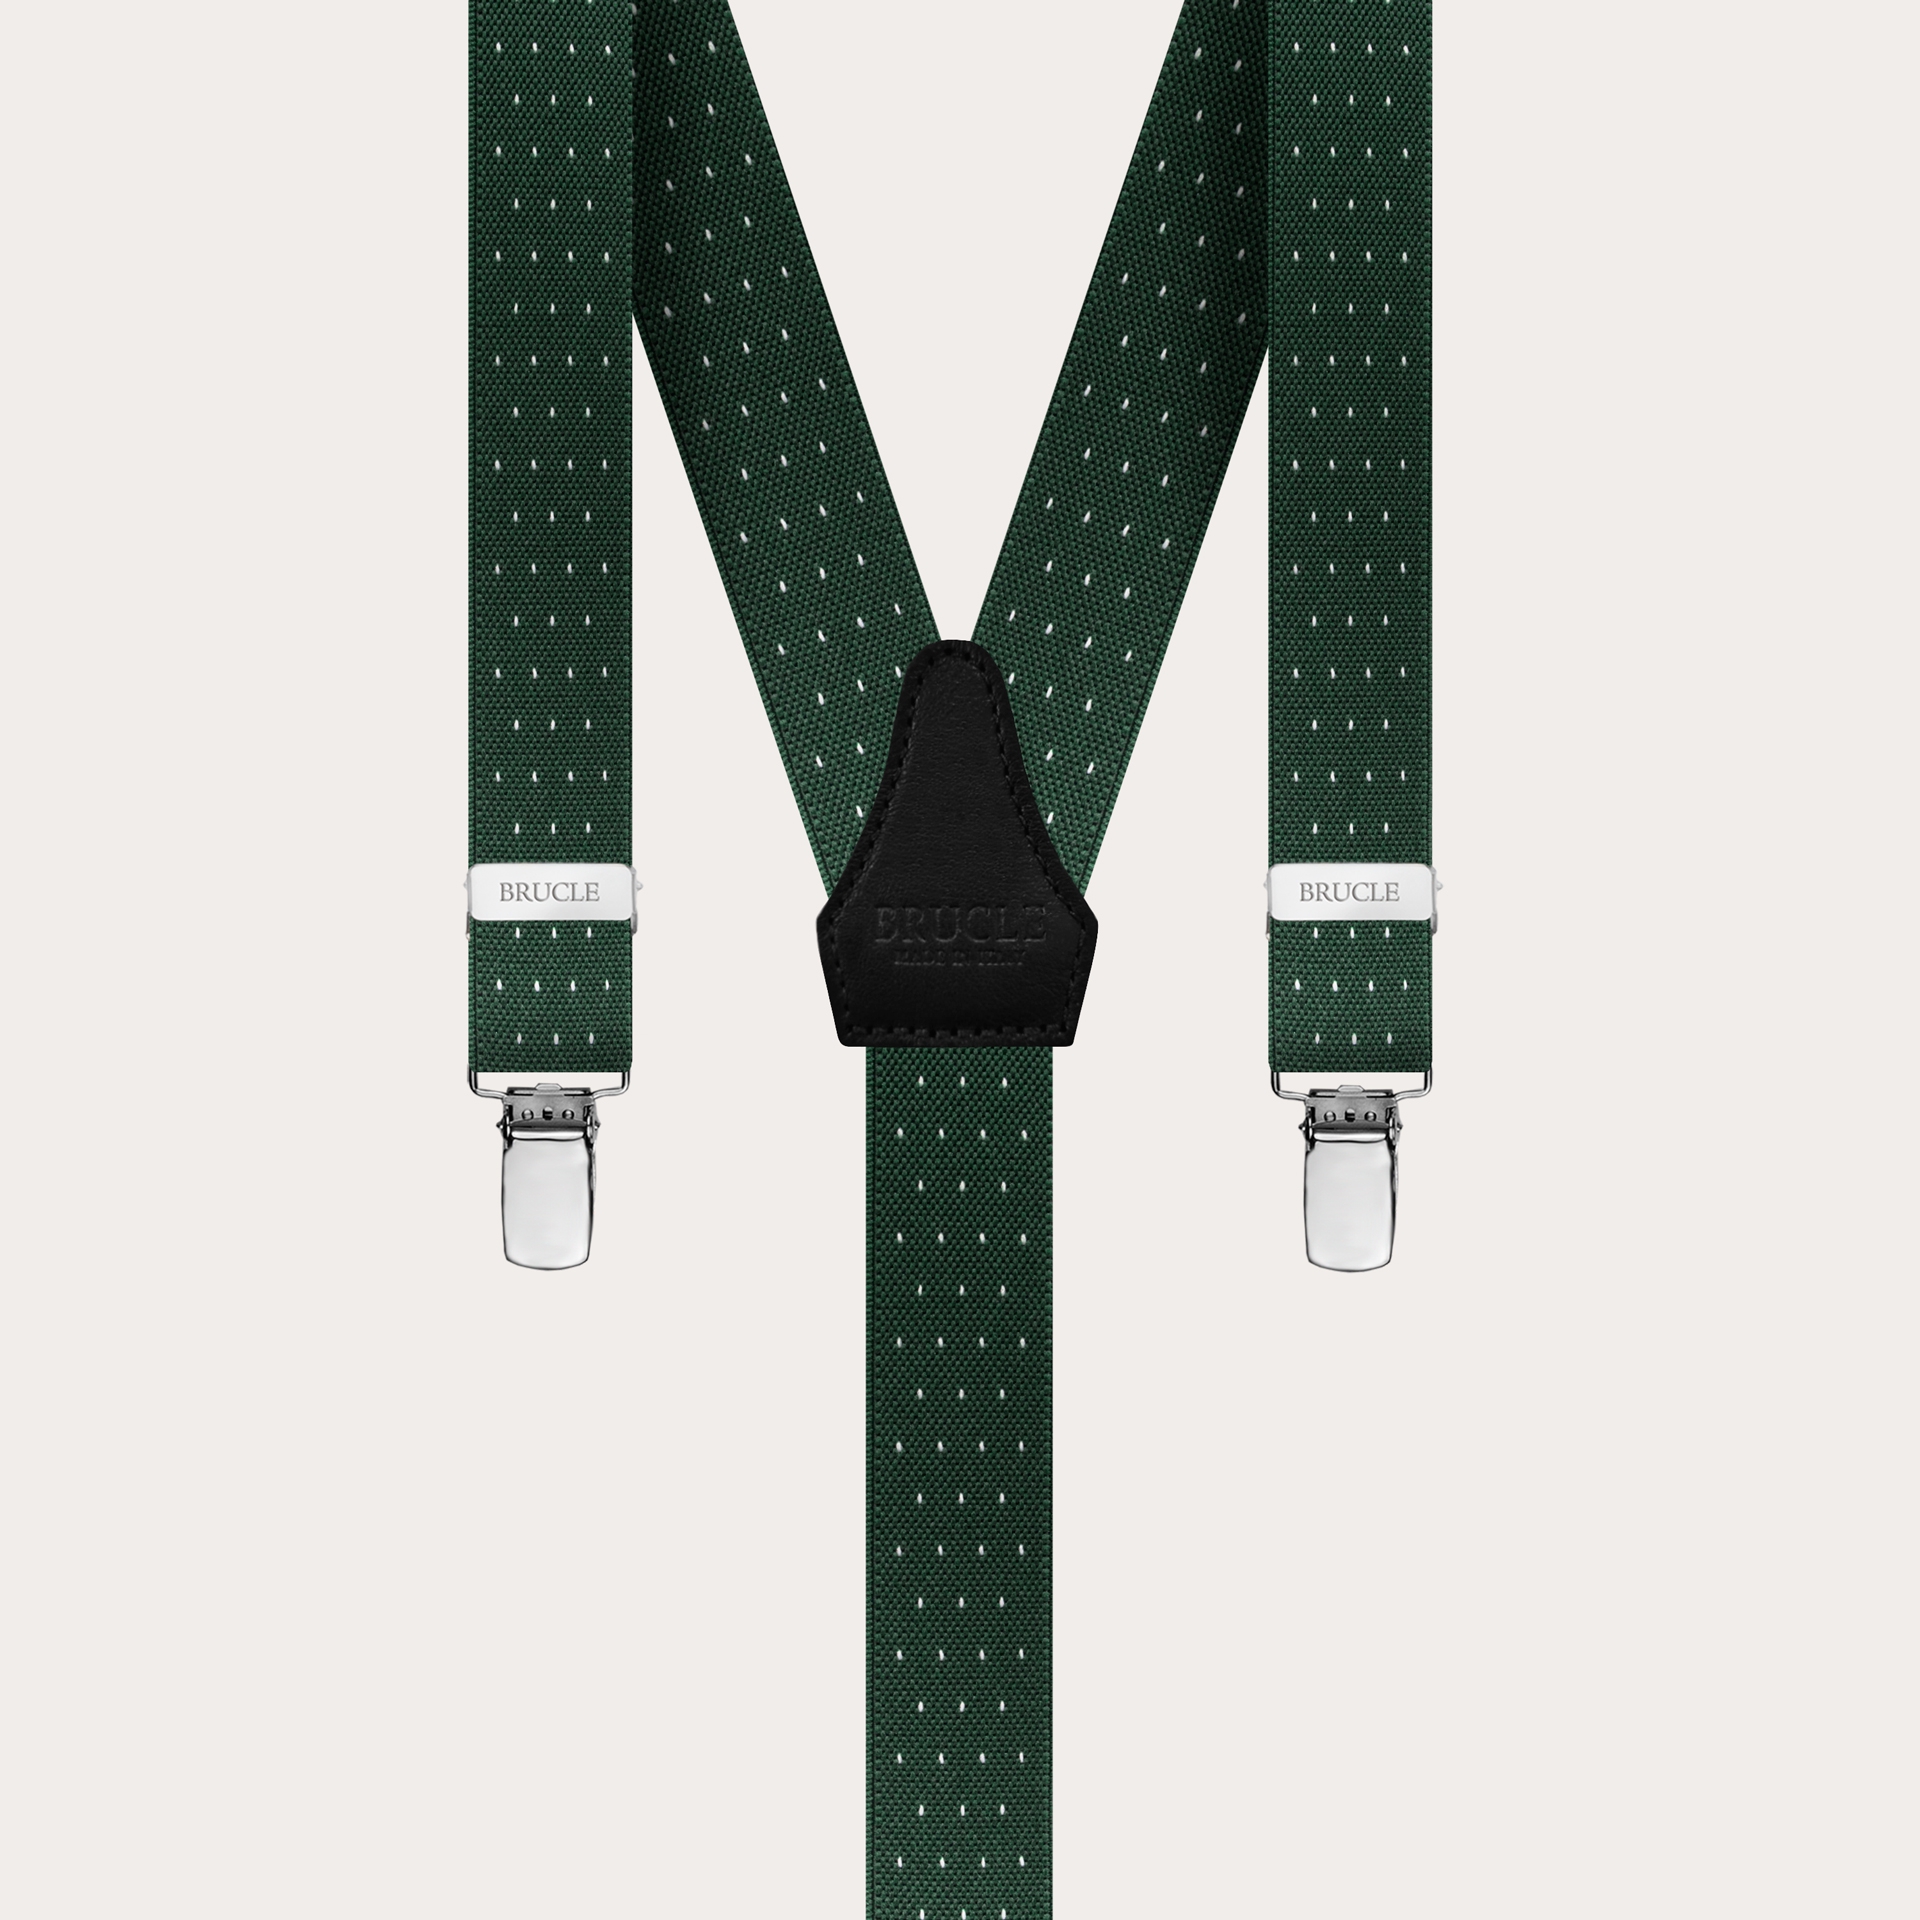 BRUCLE Refined nickel free narrow suspenders with dotted pattern, green